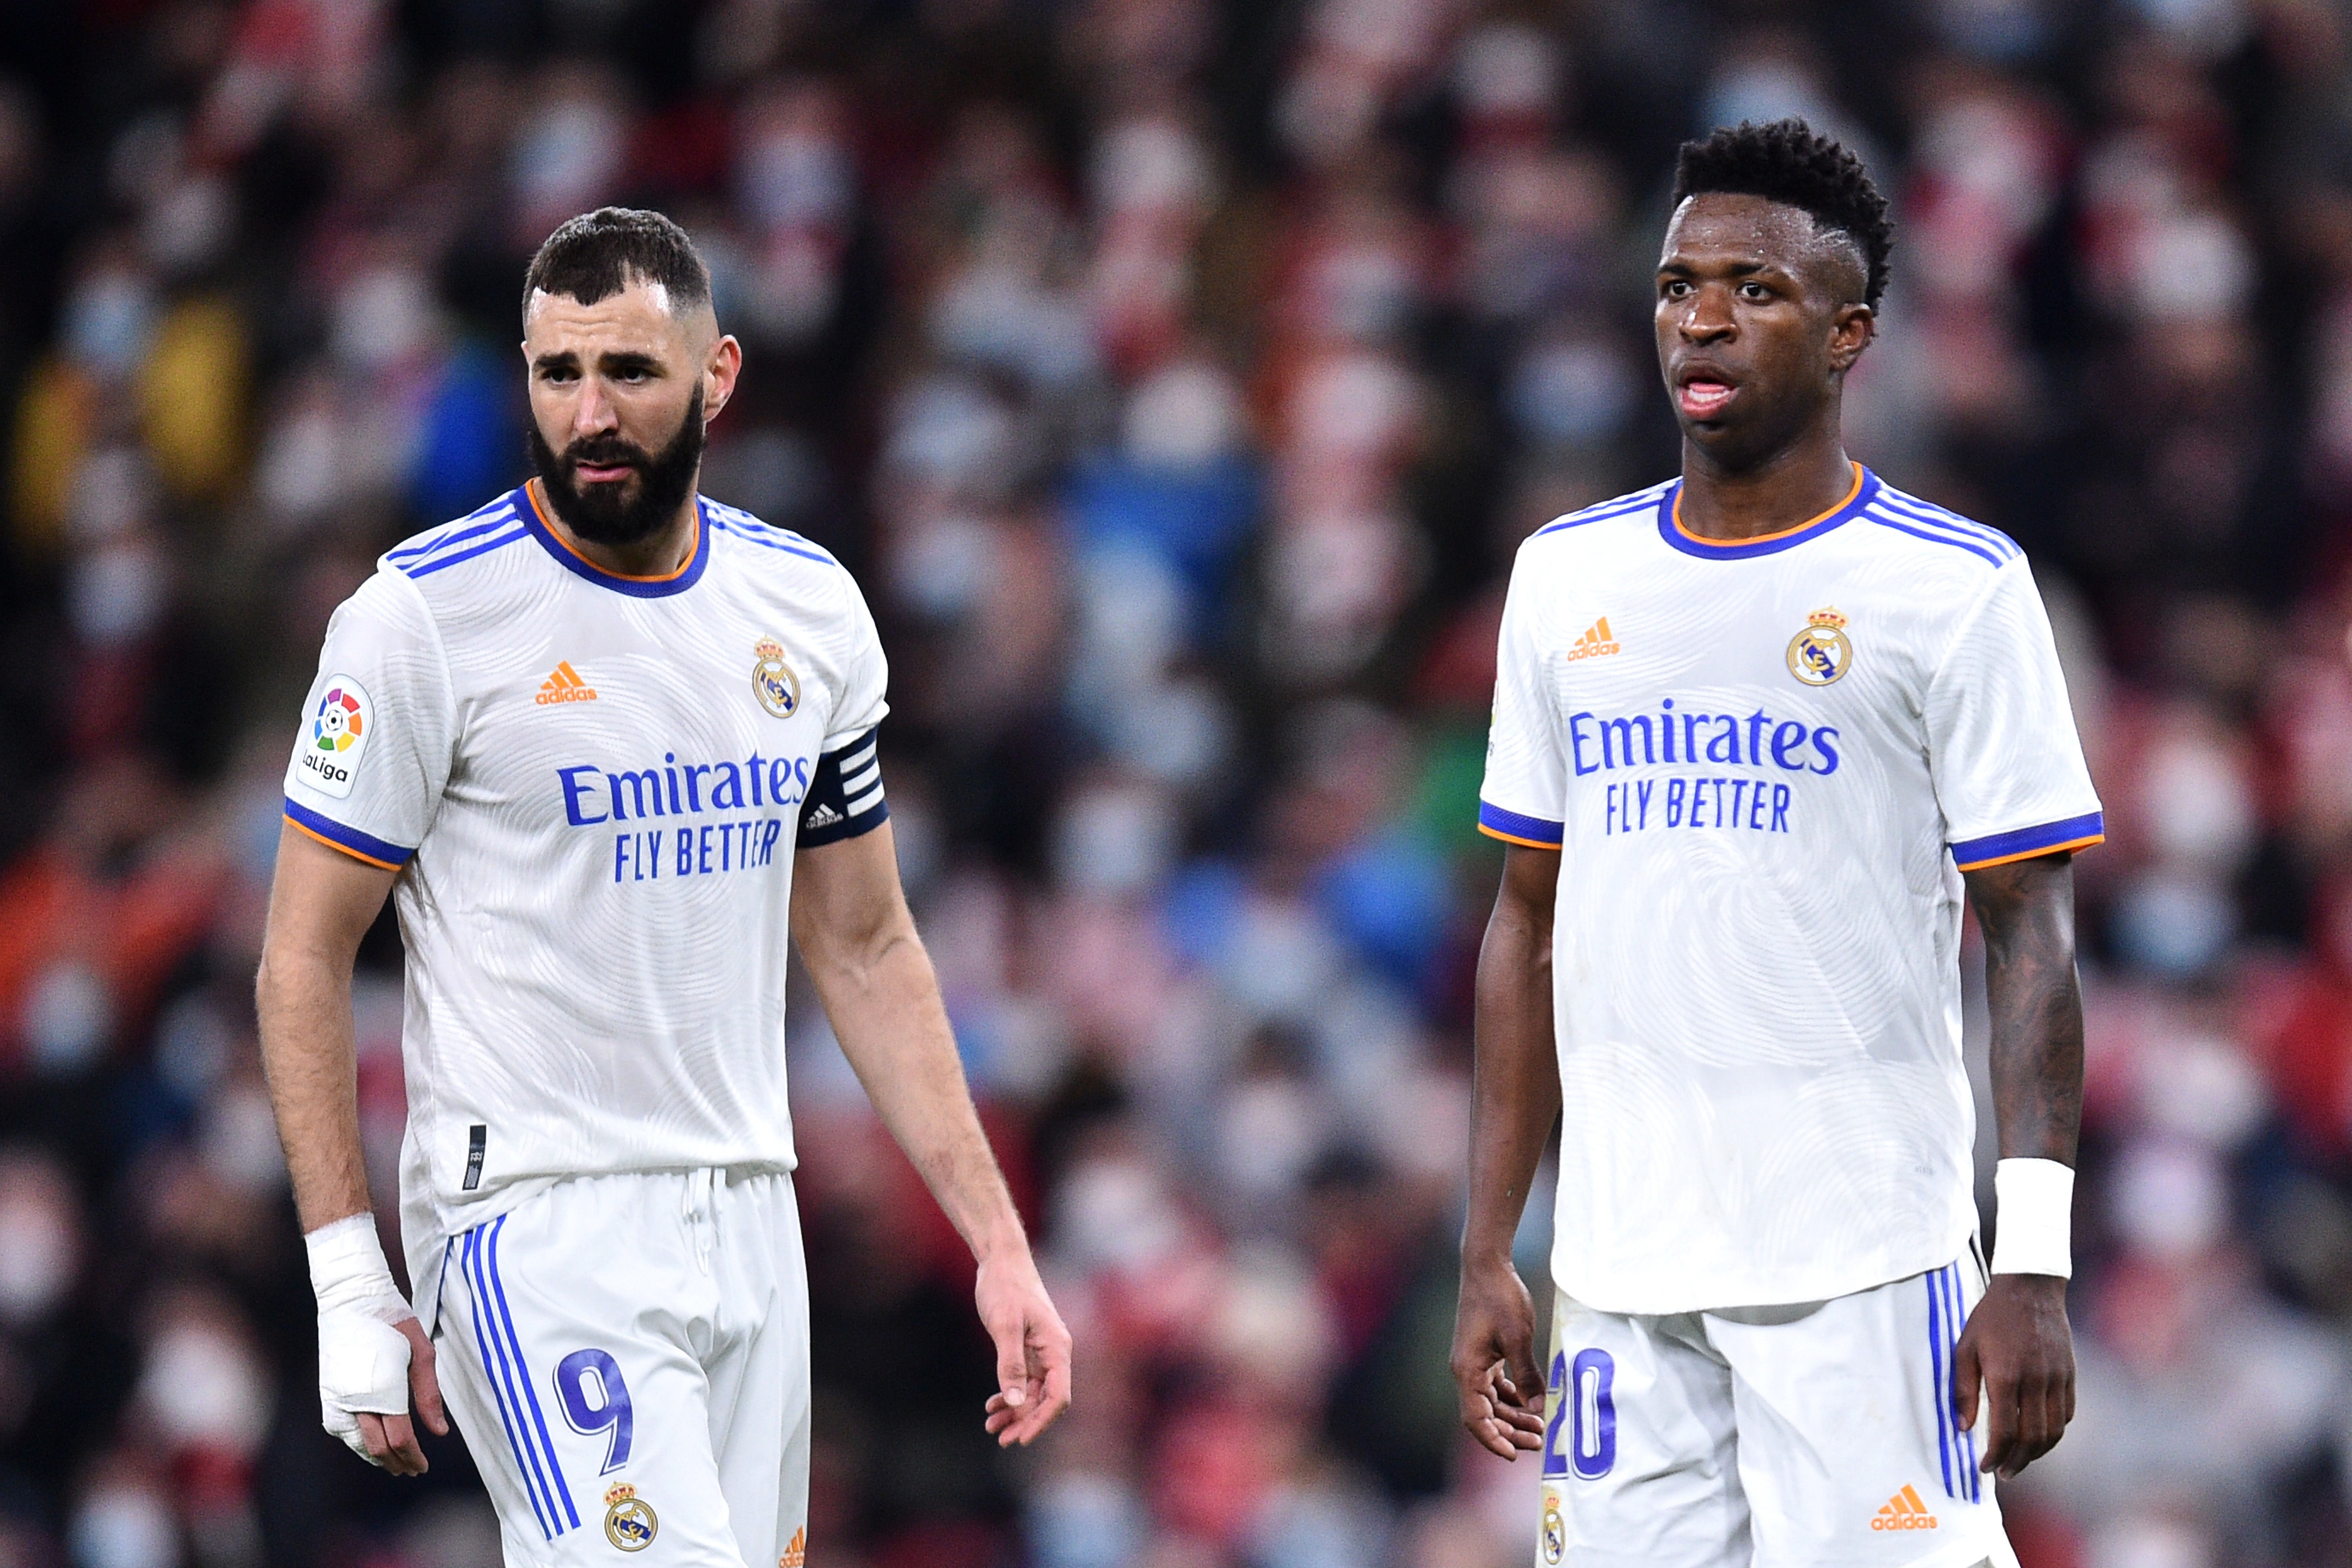 Karim Benzema and Vinicius Junior are the understated stars of the Real Madrid attack